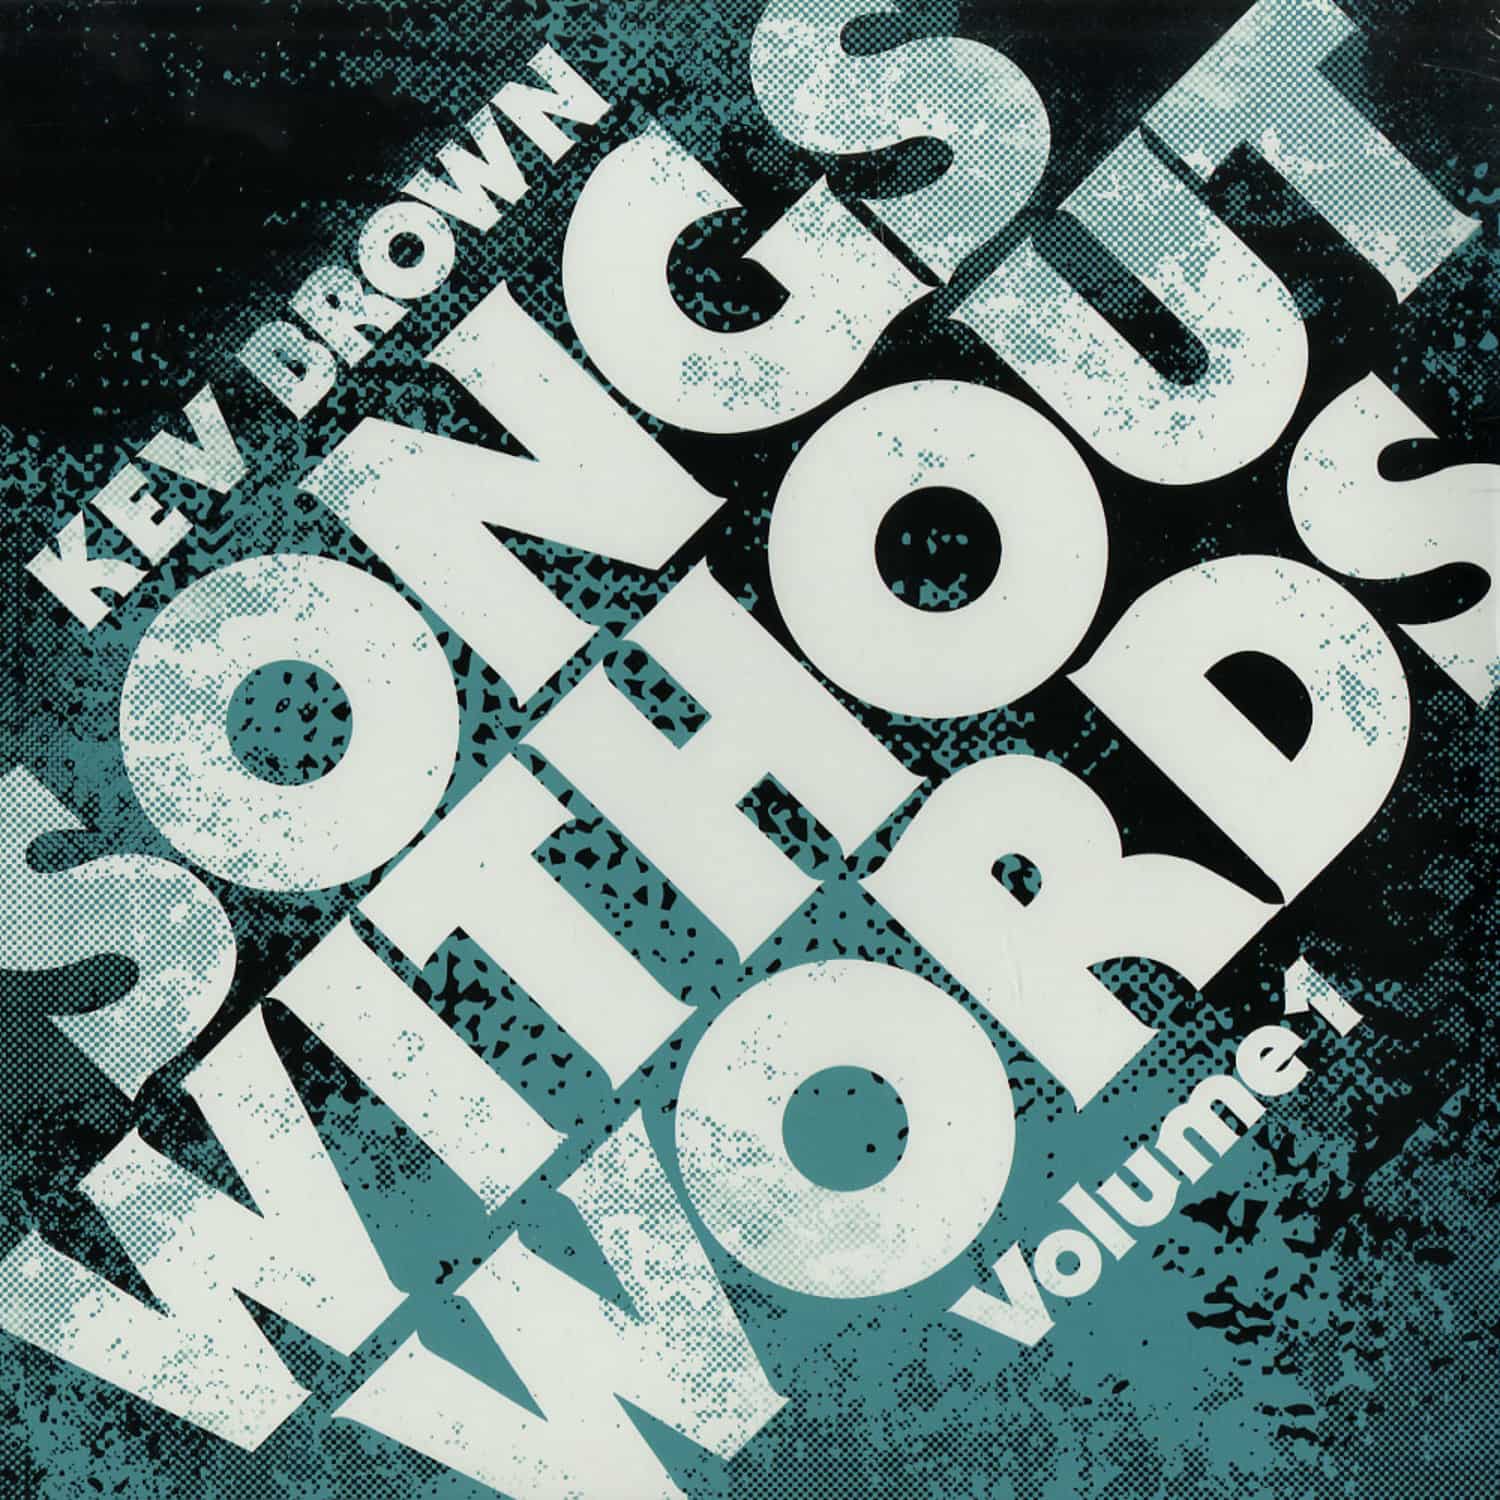 Kev Brown - SONGS WITHOUT WORDS VOL. 1 